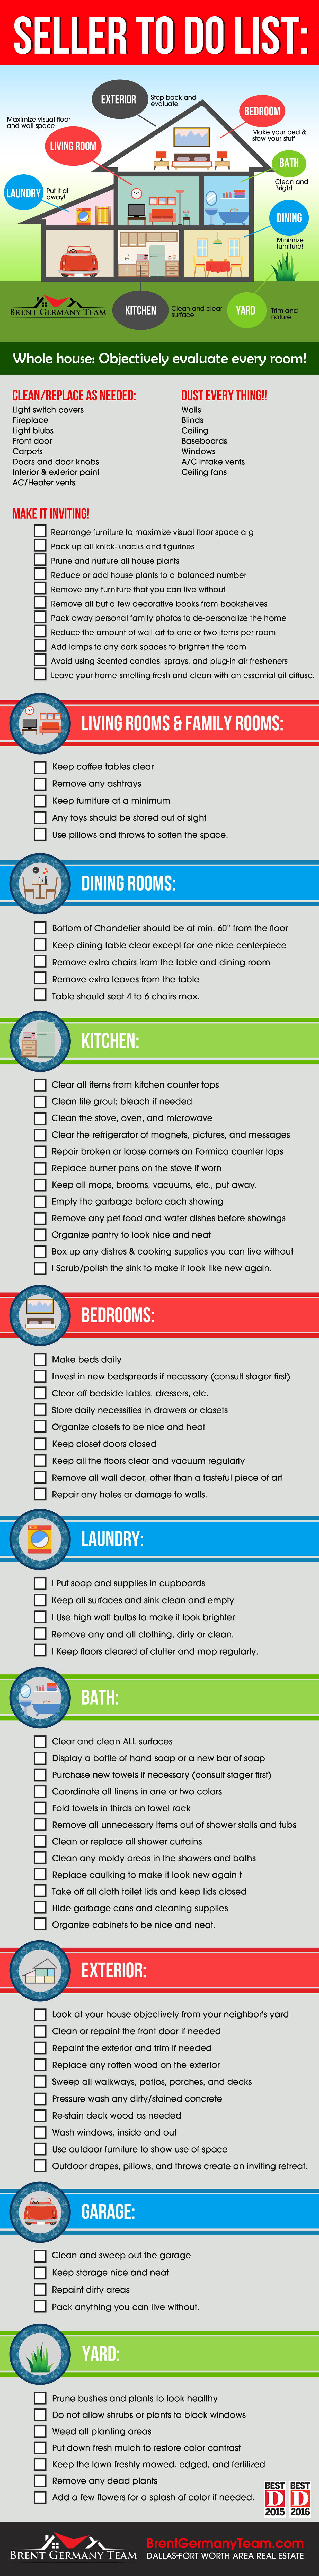 The Ultimate Home Seller's To-Do Checklist & Infographic